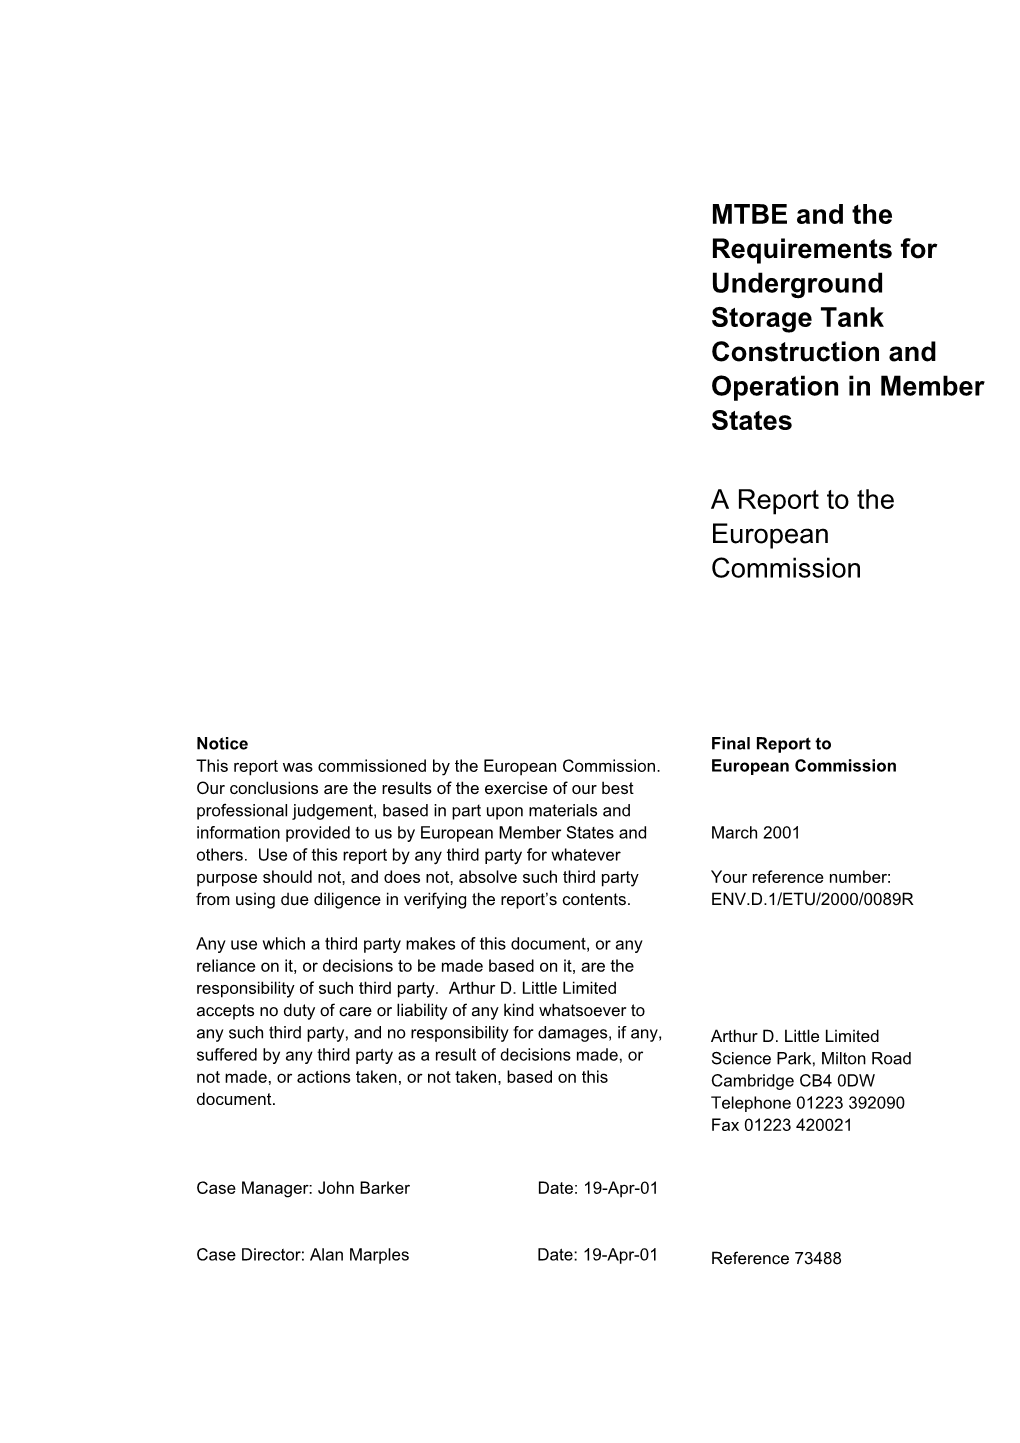 MTBE and the Requirements for Underground Storage Tank Construction and Operation in Member States